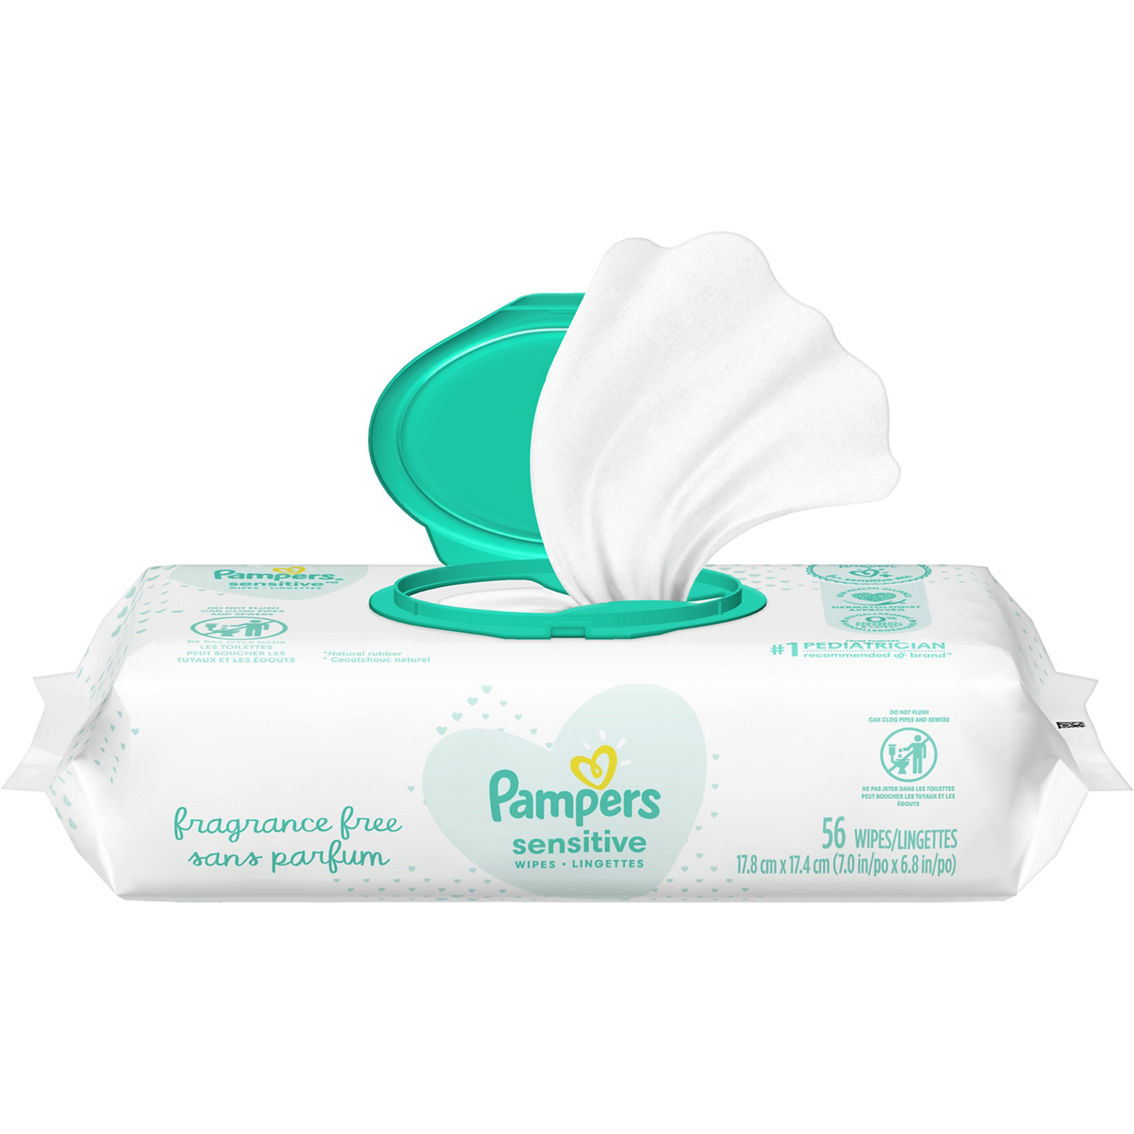 Pampers Sensitive Baby Wipes - Image 2 of 2